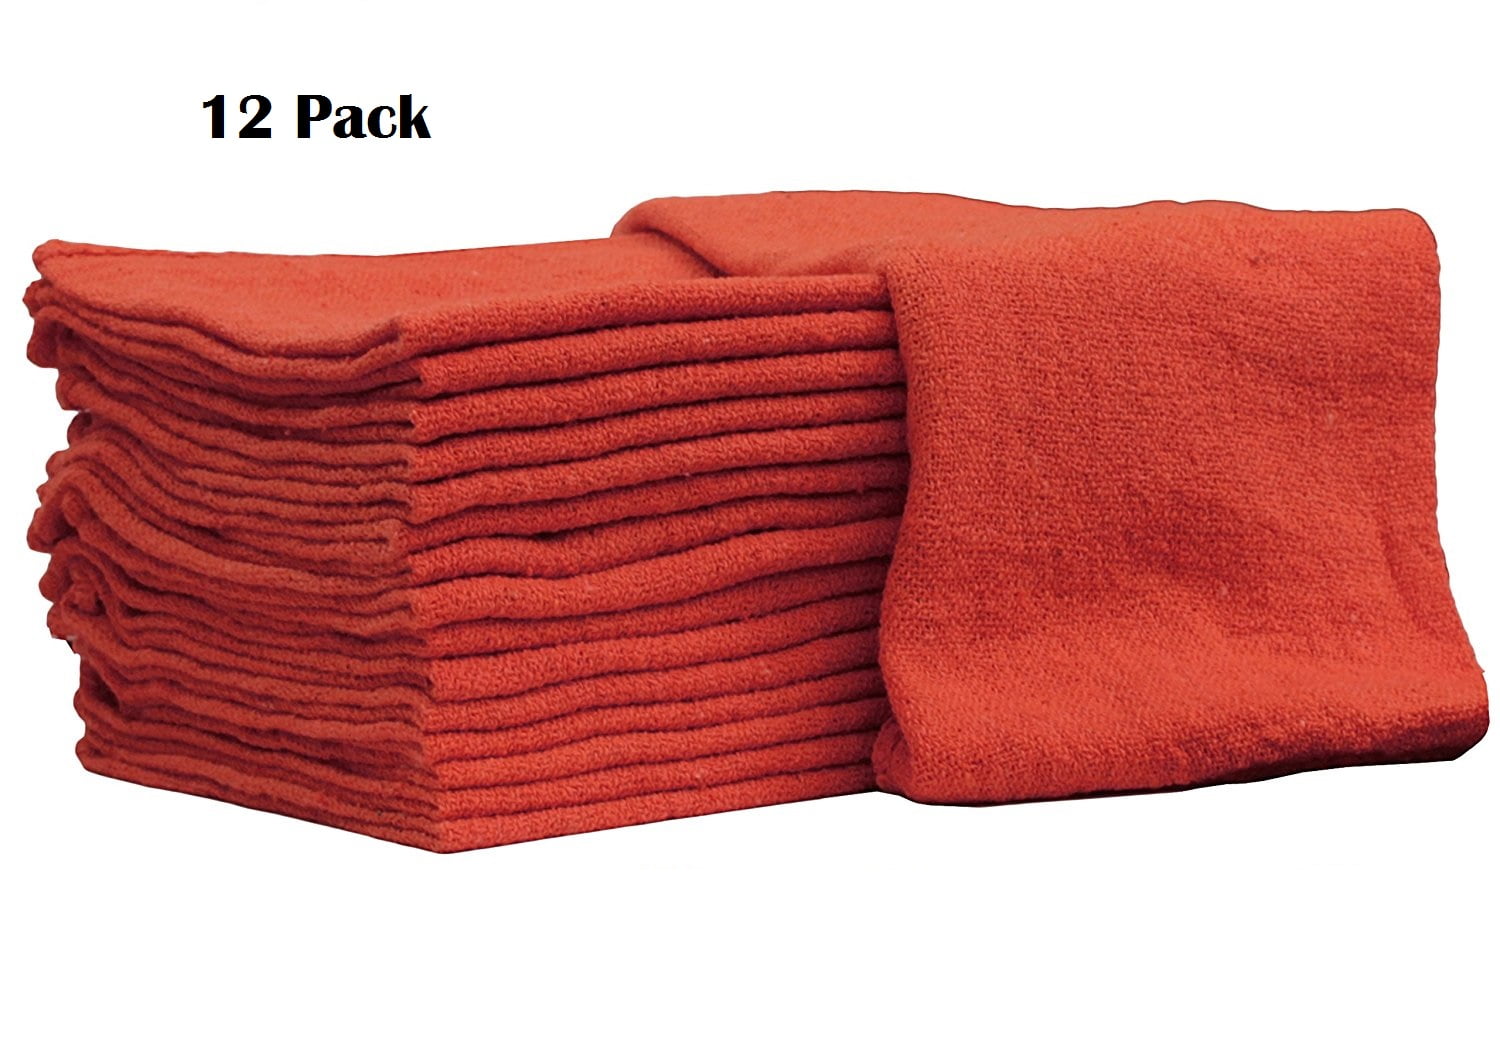 100 RED SHOP TOWELS RAGS INDUSTRIAL CLEANING AVERAGE 14X14 LARGE BRAND NEW 